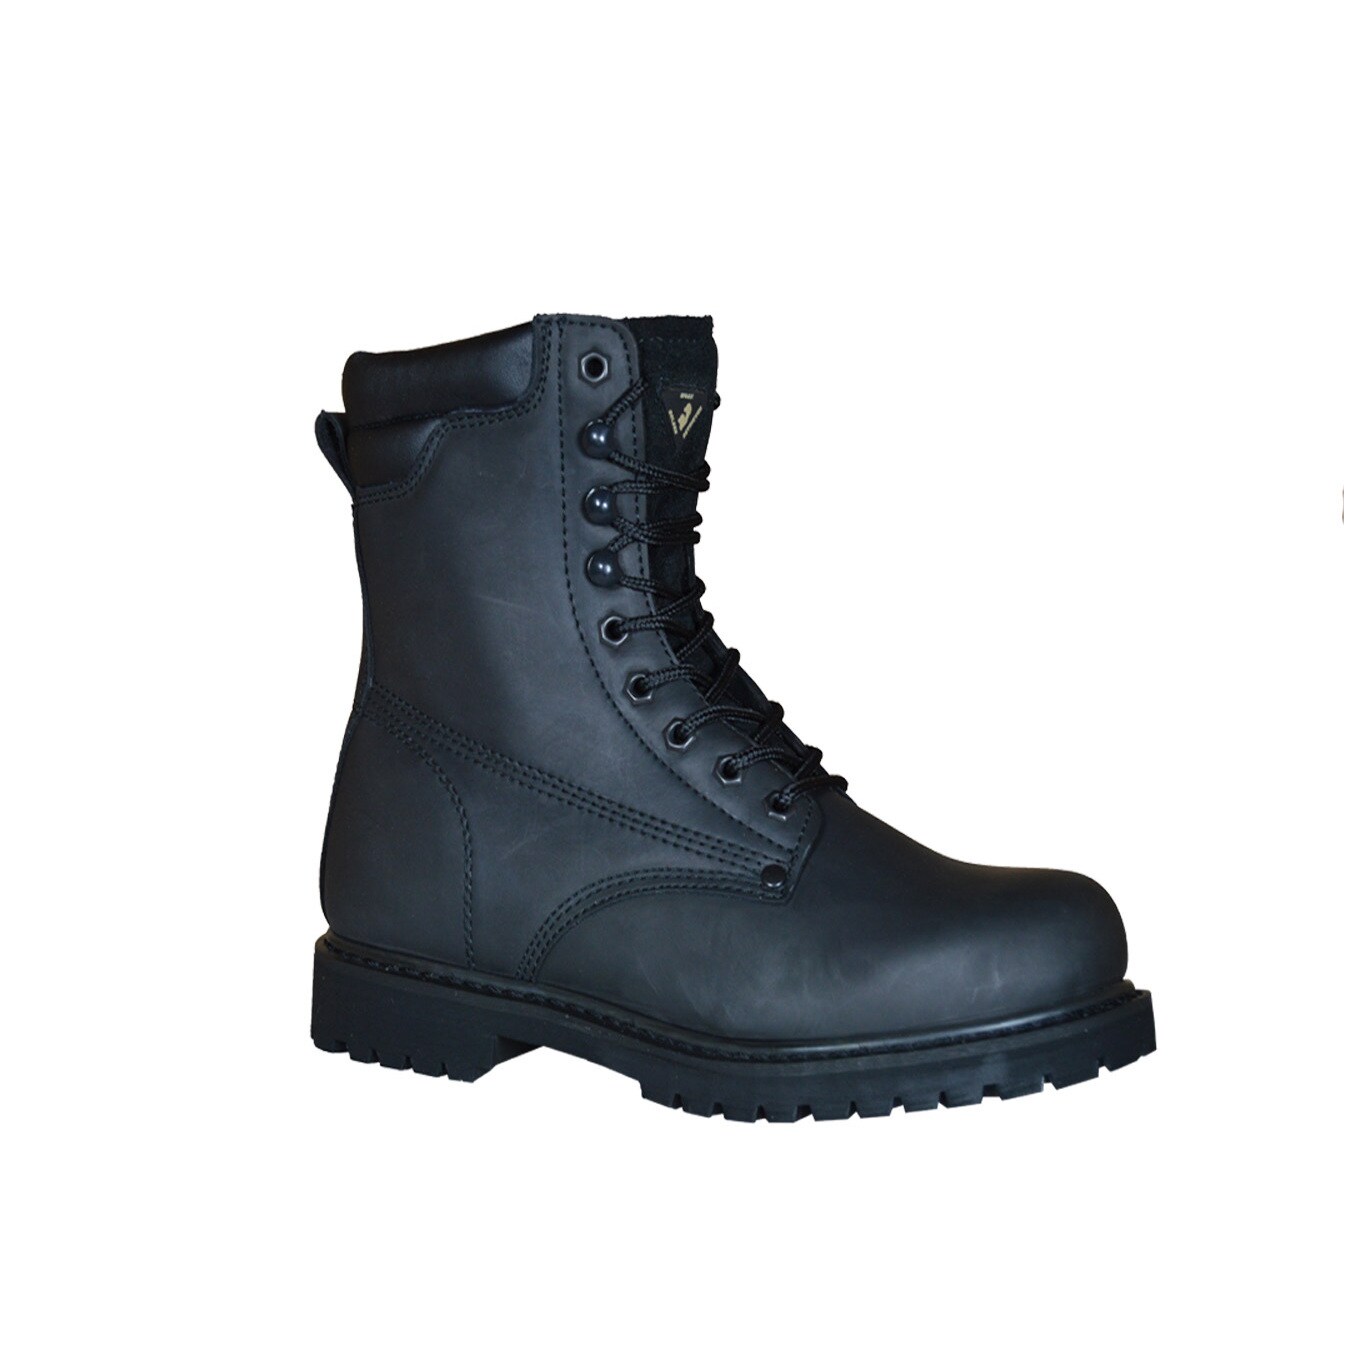 8 inch rubber boots